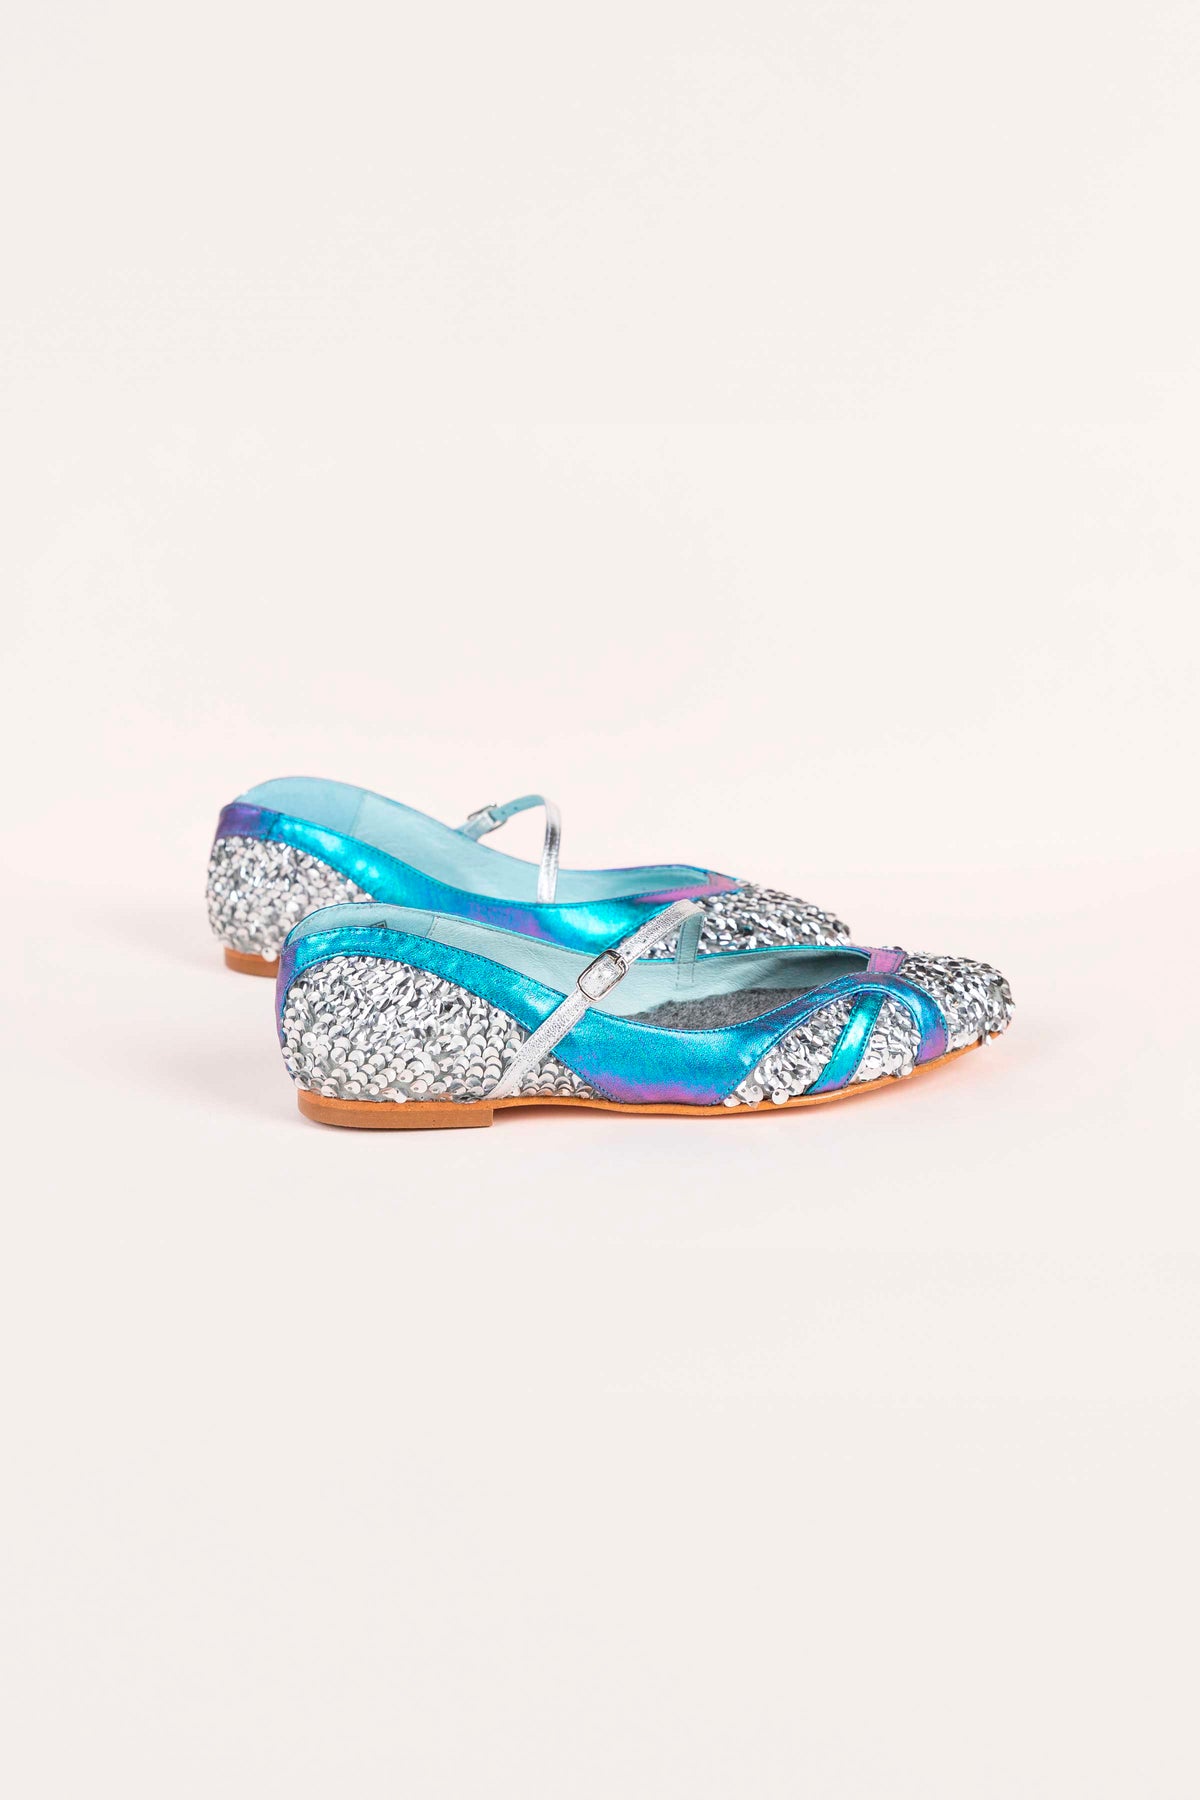 Sierra Nevada Silver Ballerina (includes wool and leather insole)